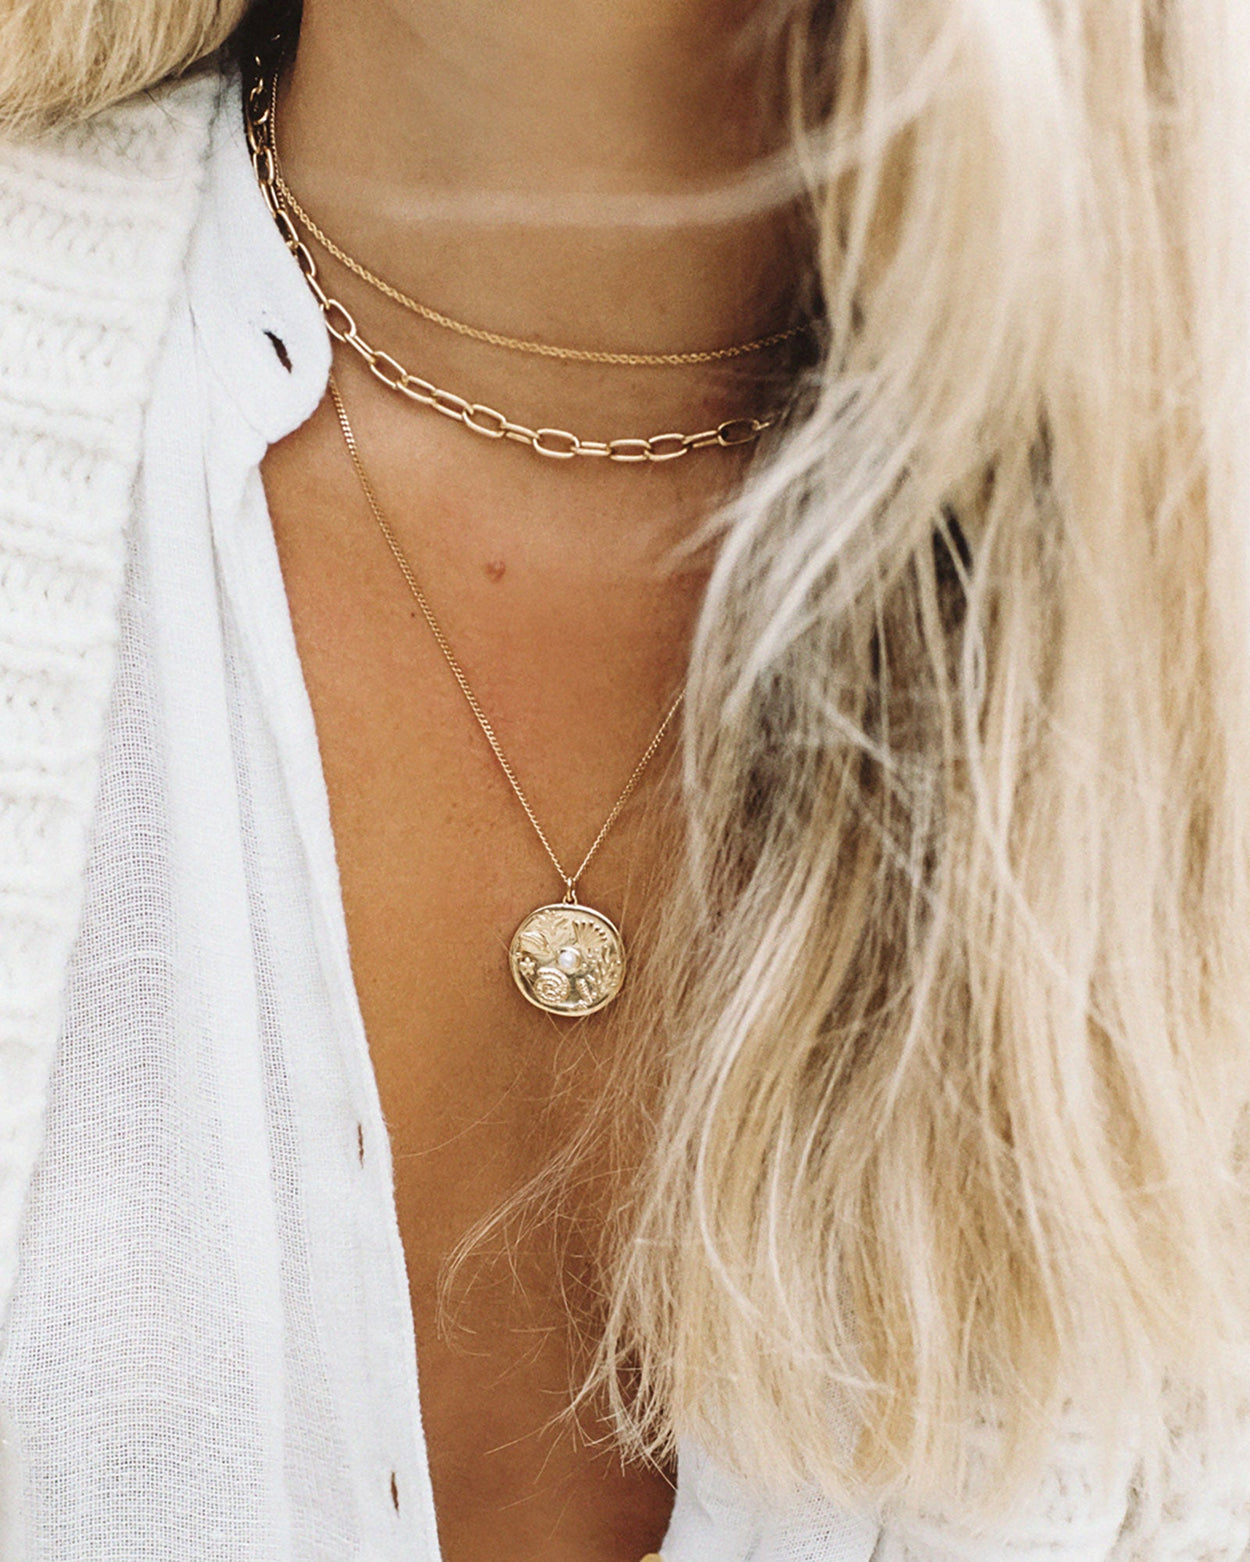 BY THE SEA COIN NECKLACE (18K GOLD VERMEIL) – KIRSTIN ASH (United States)